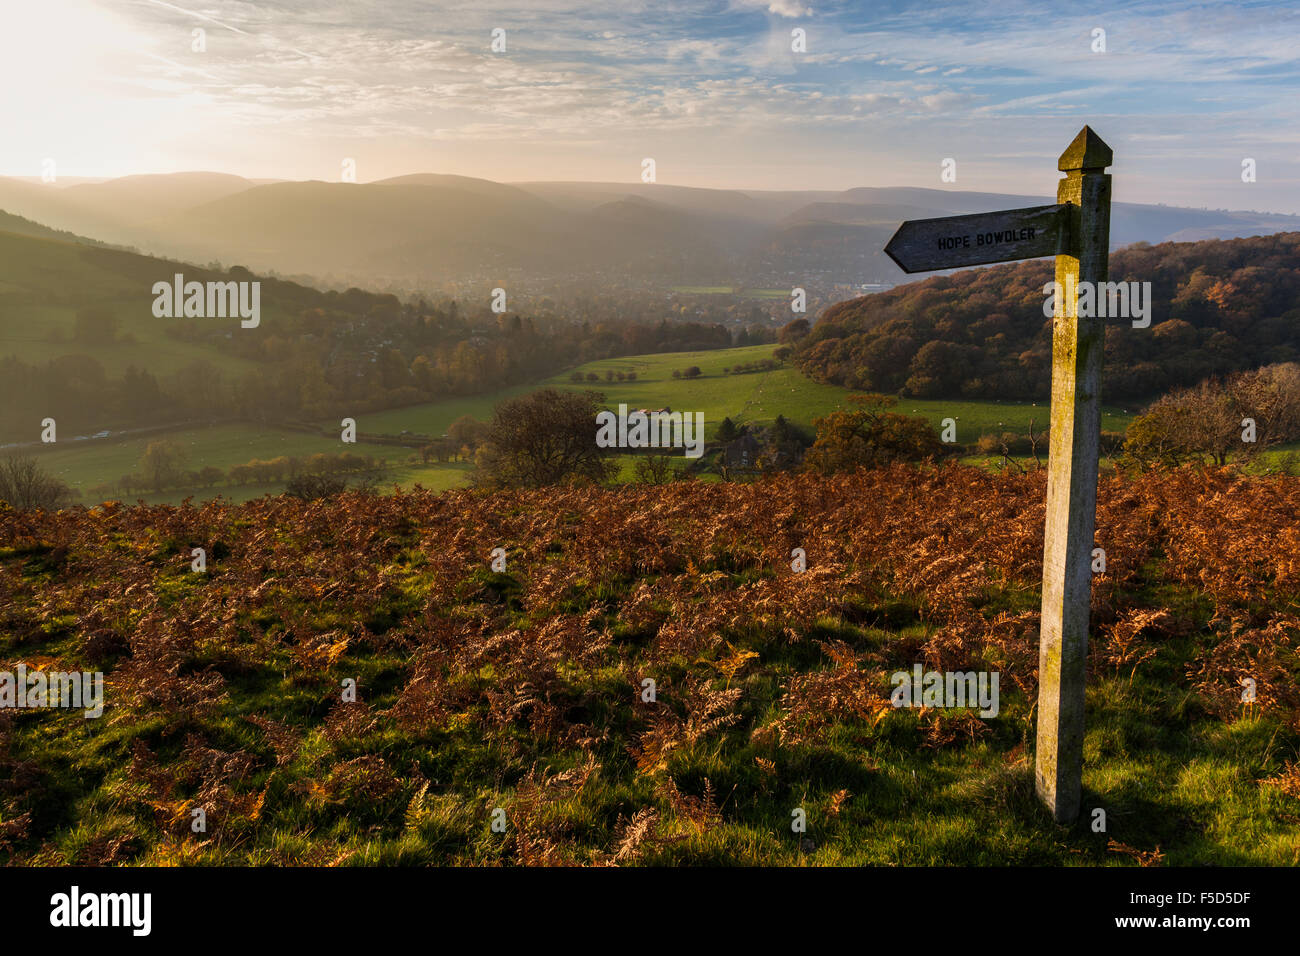 Church Stretton and the Long Mynd seen from the lower slopes of Hope Bowdler Hill, Shropshire, UK Stock Photo